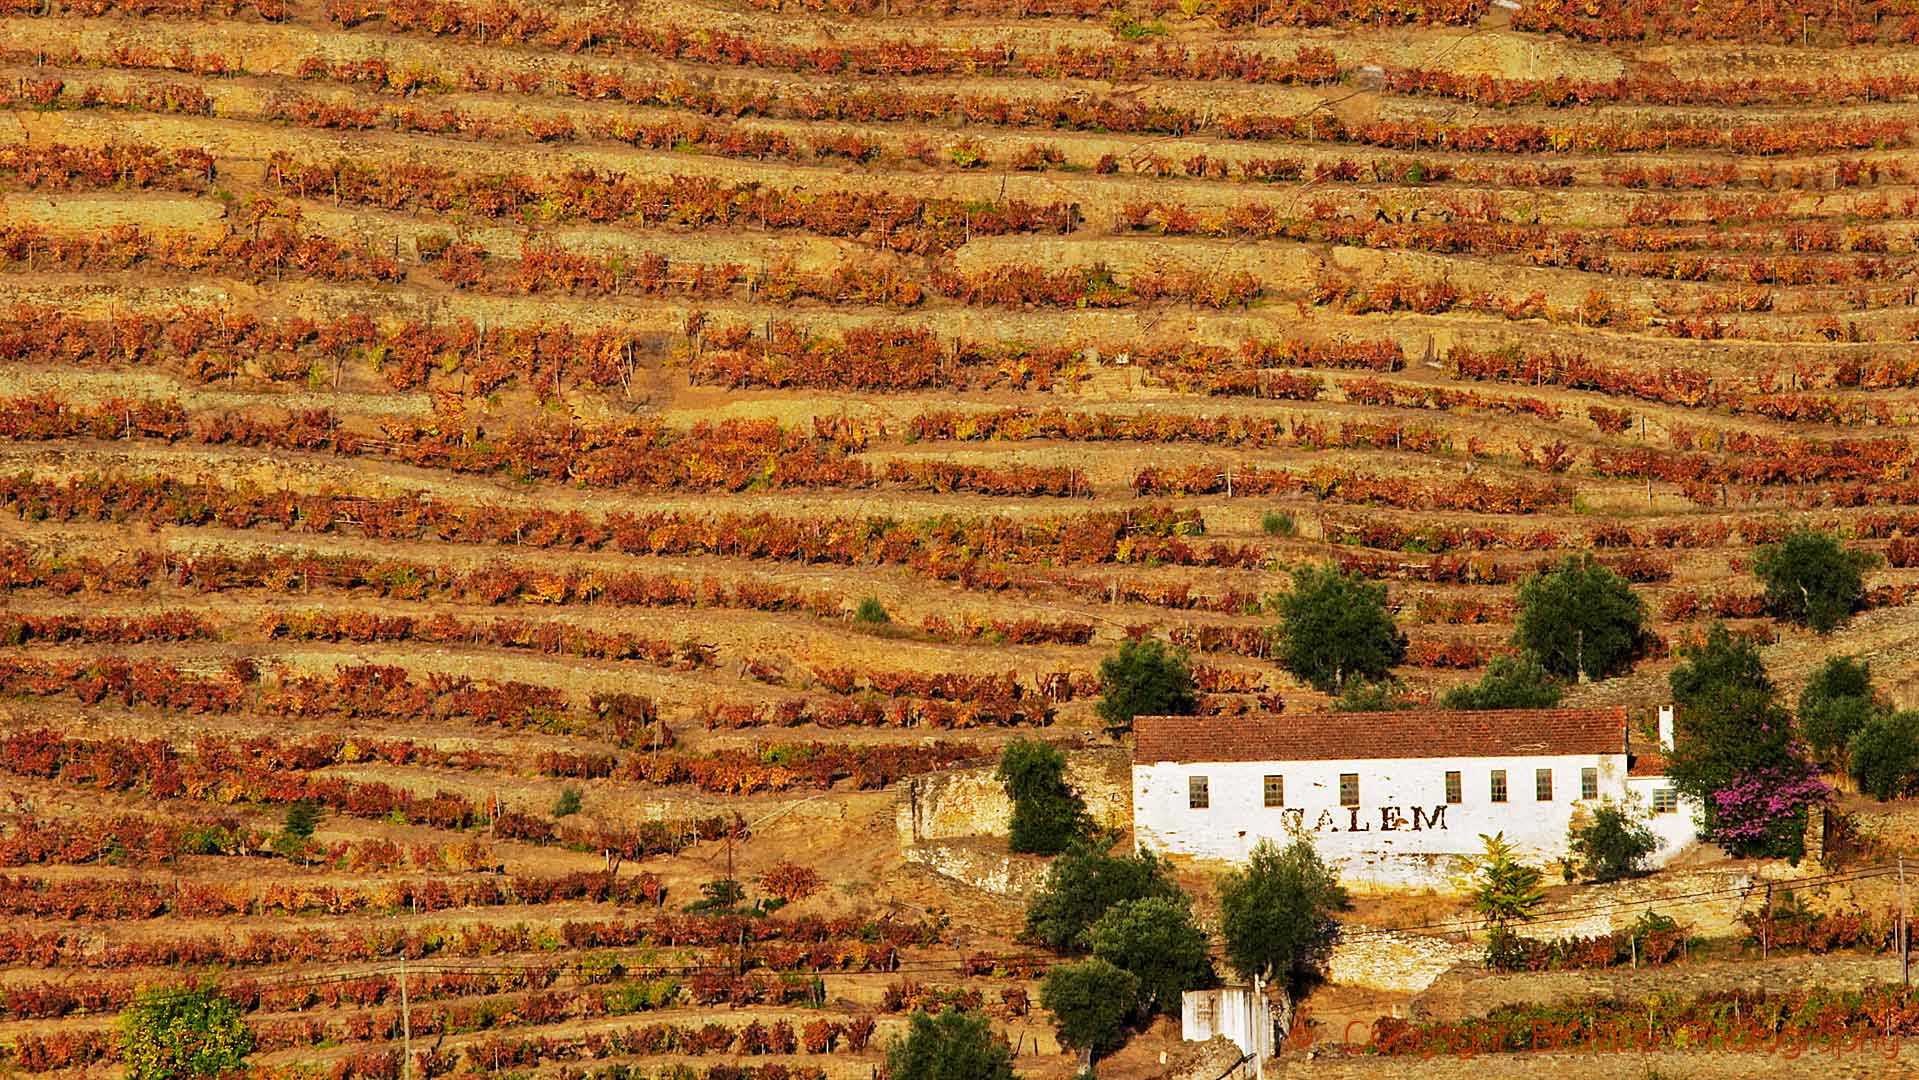 A small house surrounded by steep vineyards in the Douro Valley